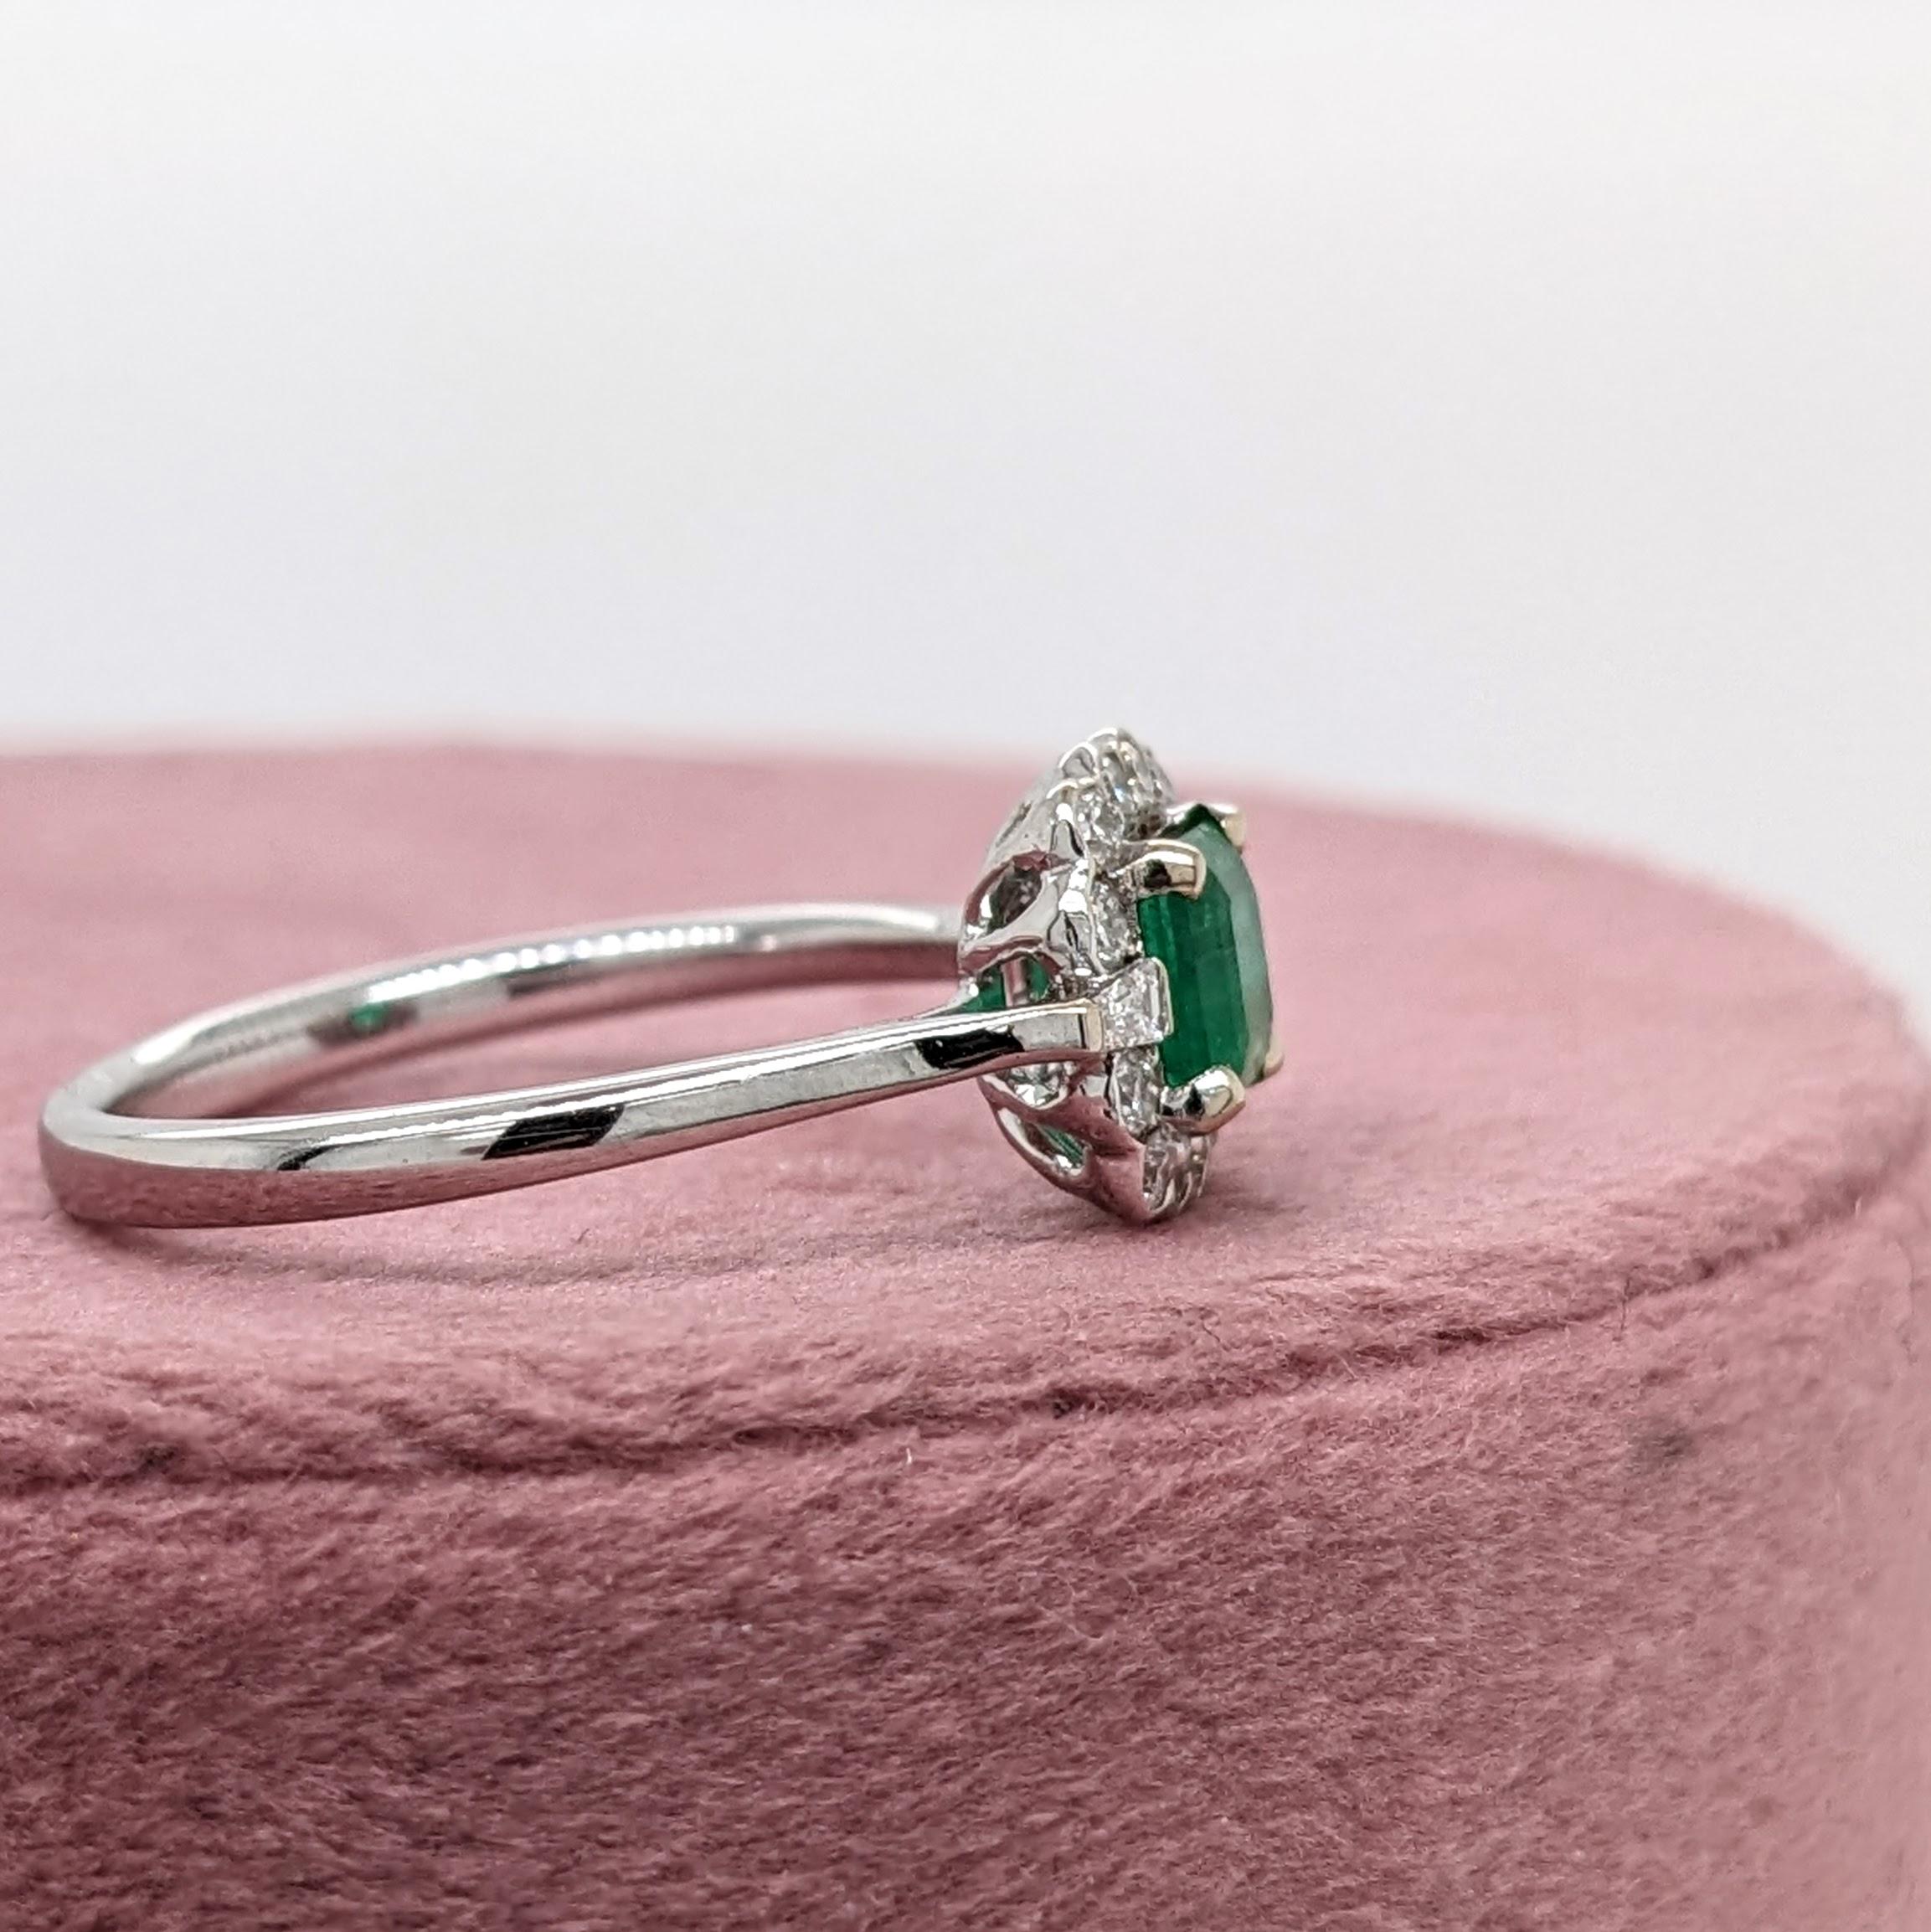 Women's Emerald w Diamond Halo & Tapered Baguette Accents in 14K Gold Emerald Cut 5mm